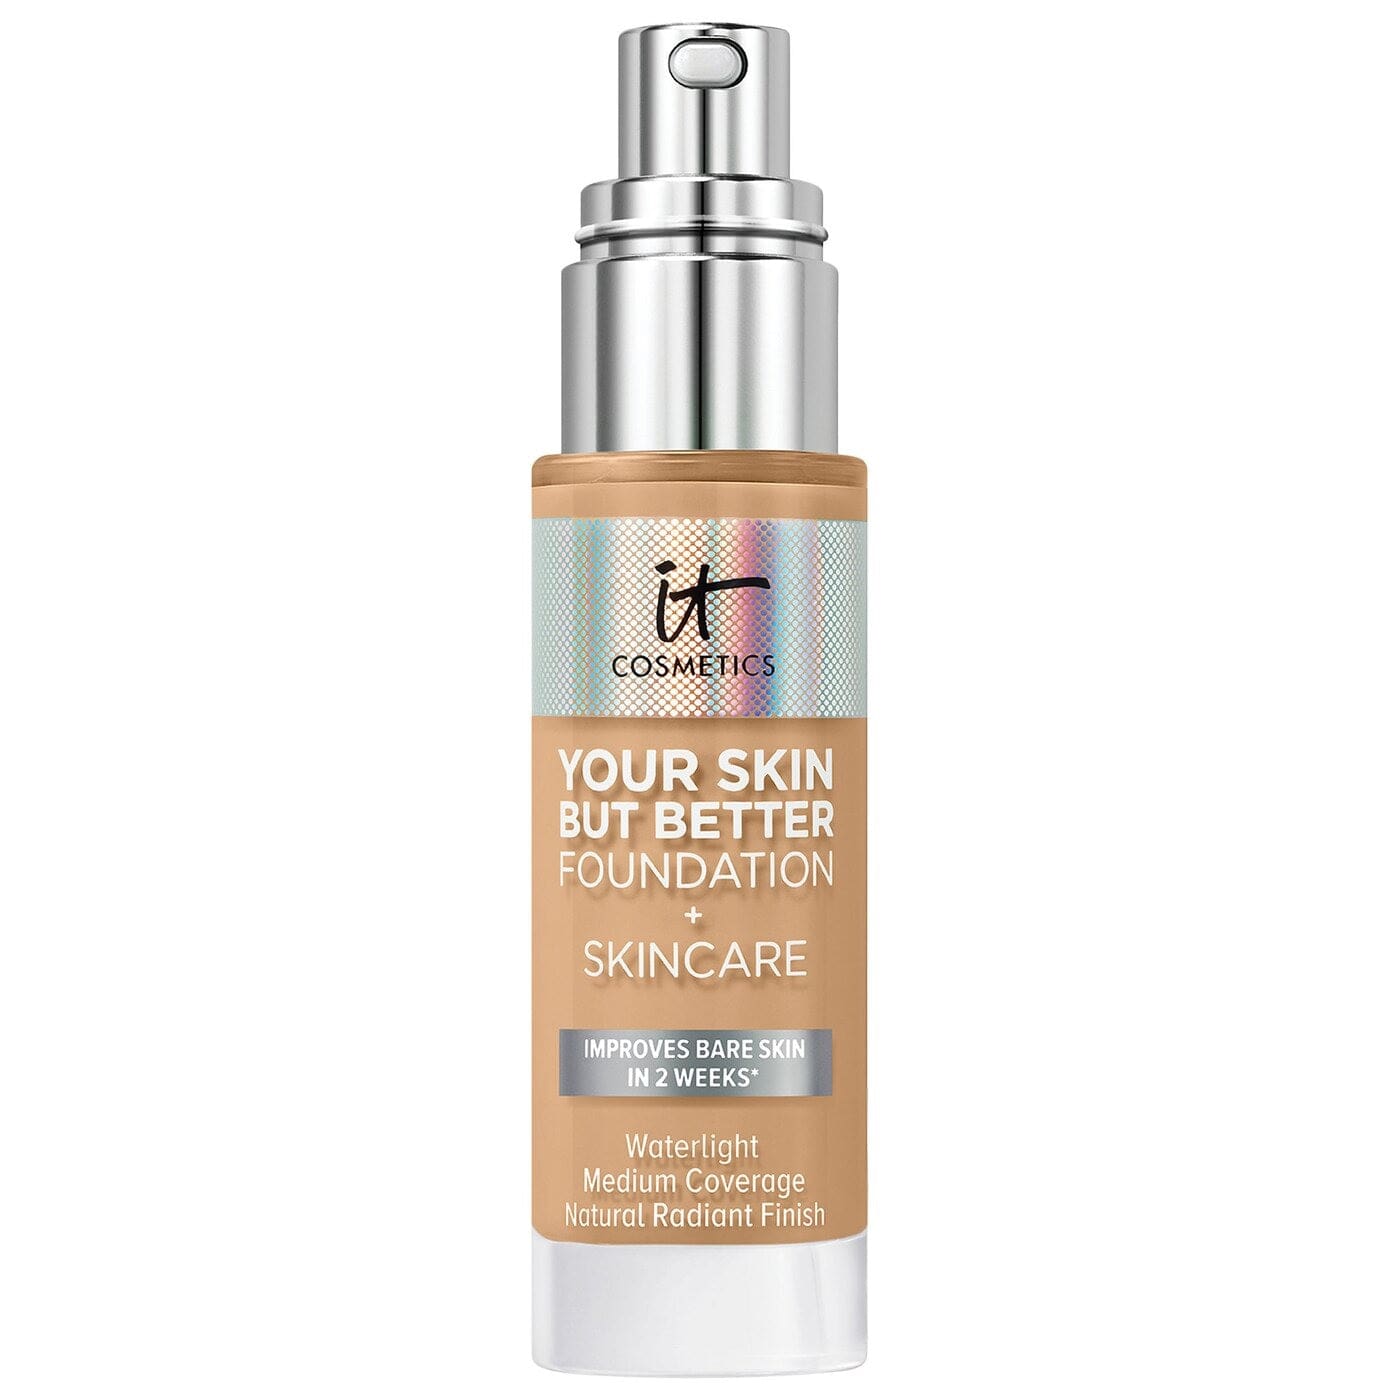 IT COSMETICS Beauty IT Cosmetics Your Skin But Better Foundation and Skincare 30ml - 31 Medium Neutral